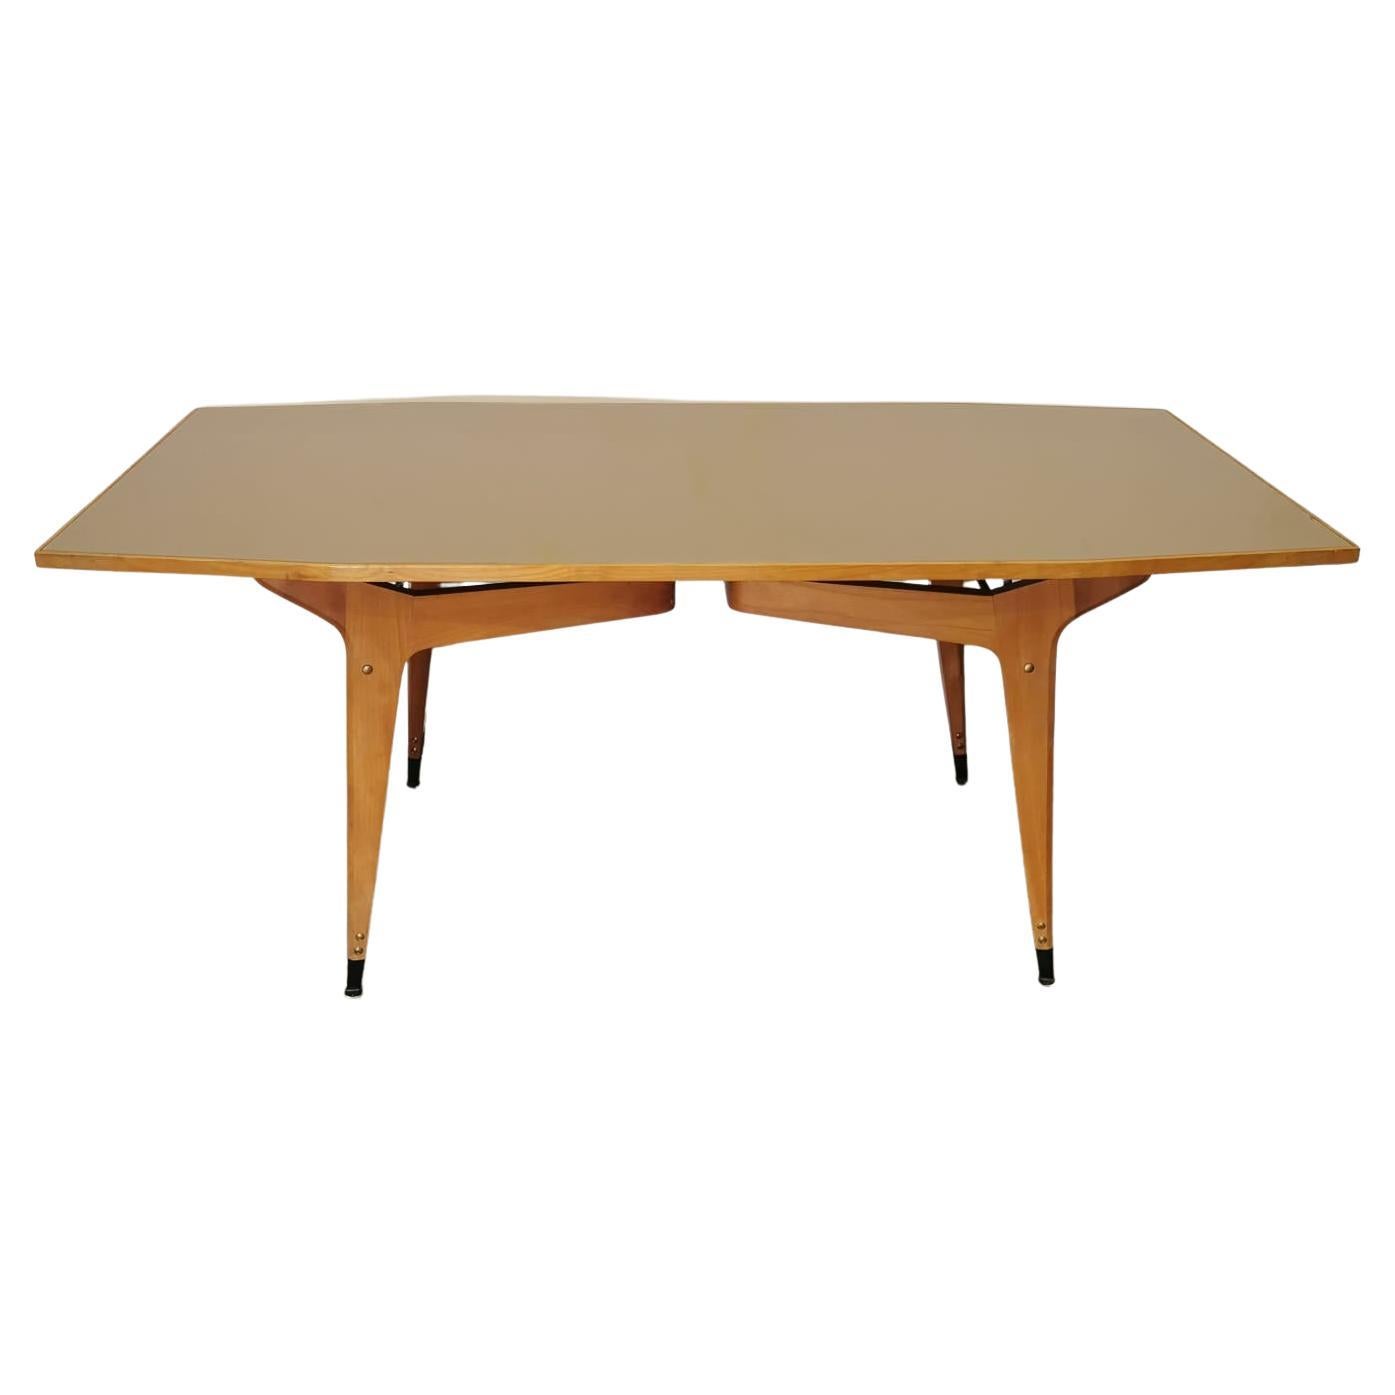 Midcentury Dining Room Table by Sorgente Del Mobile, 1950s